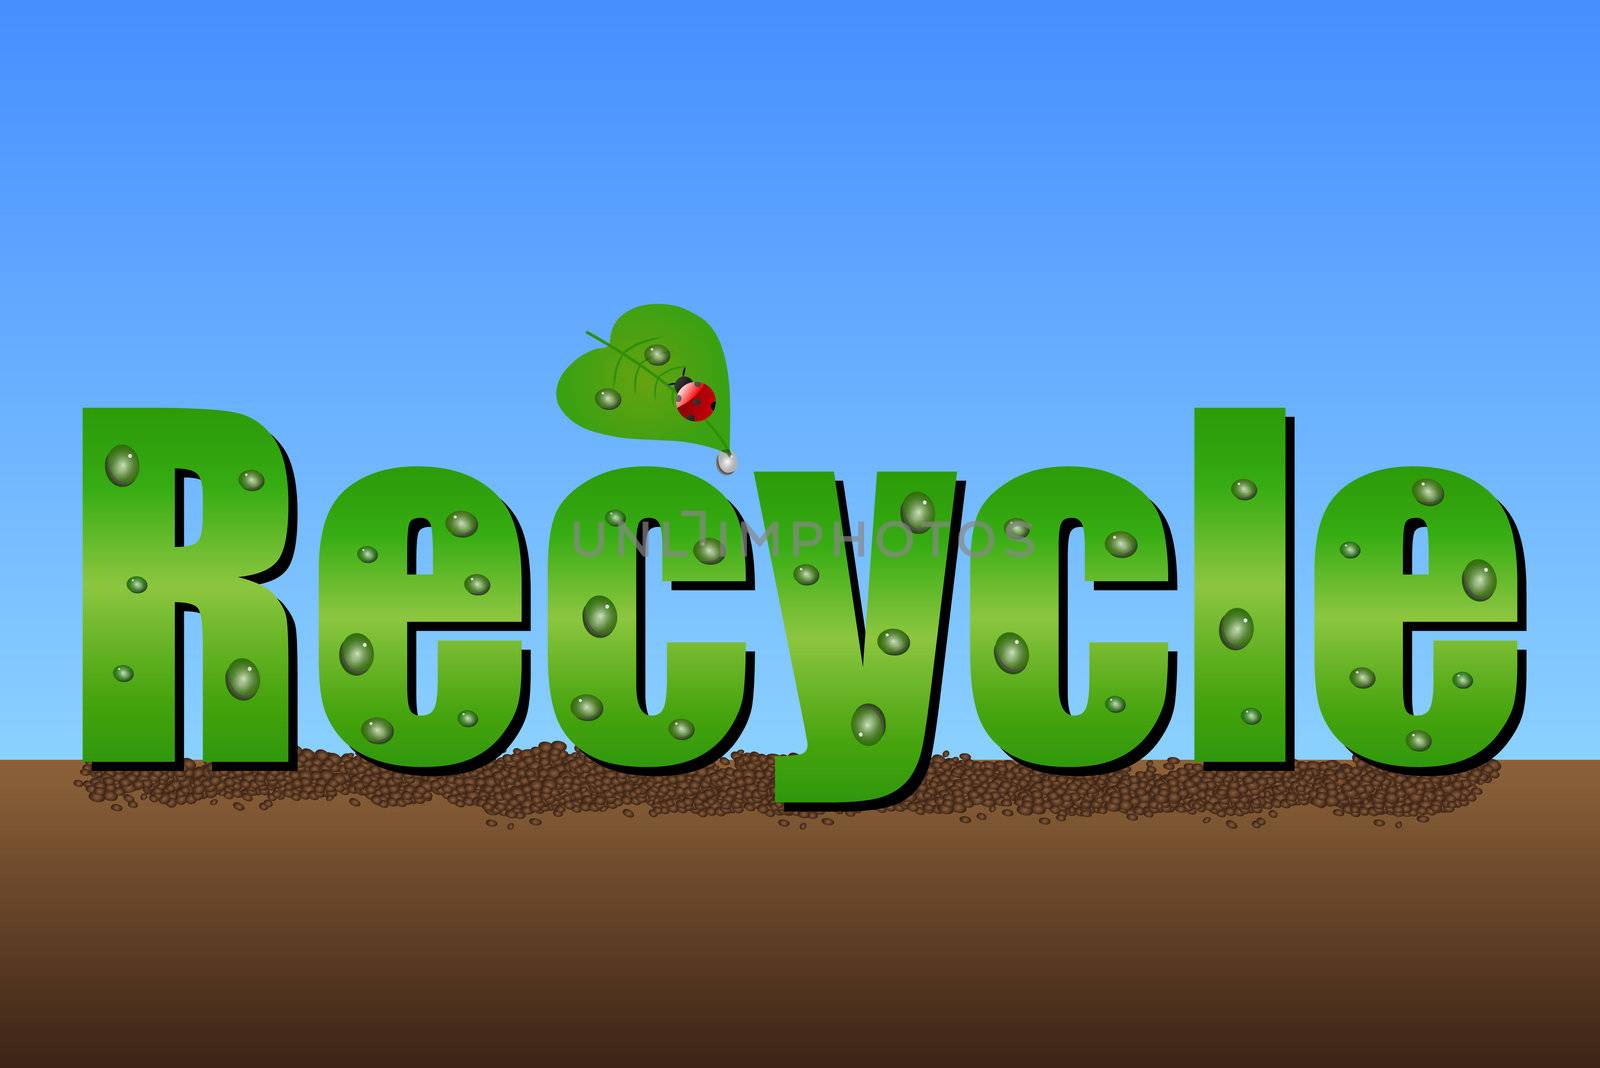 Image of the word "Recycle" on the earth against a blue sky background.